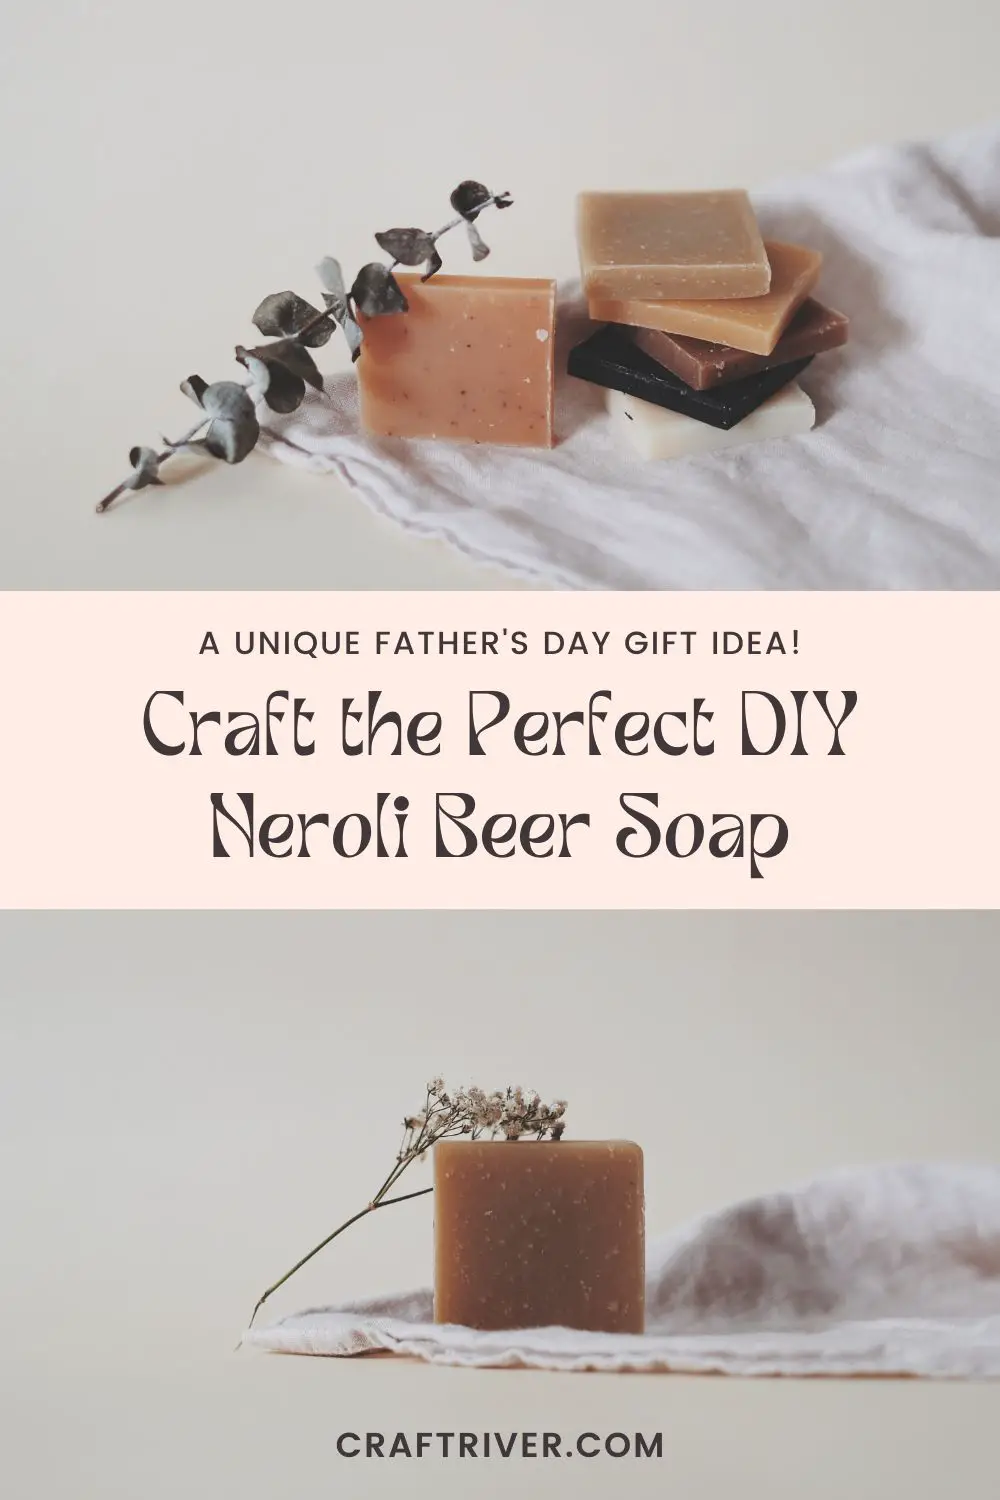 DIY Neroli Beer Soap Father's Day Gift Idea